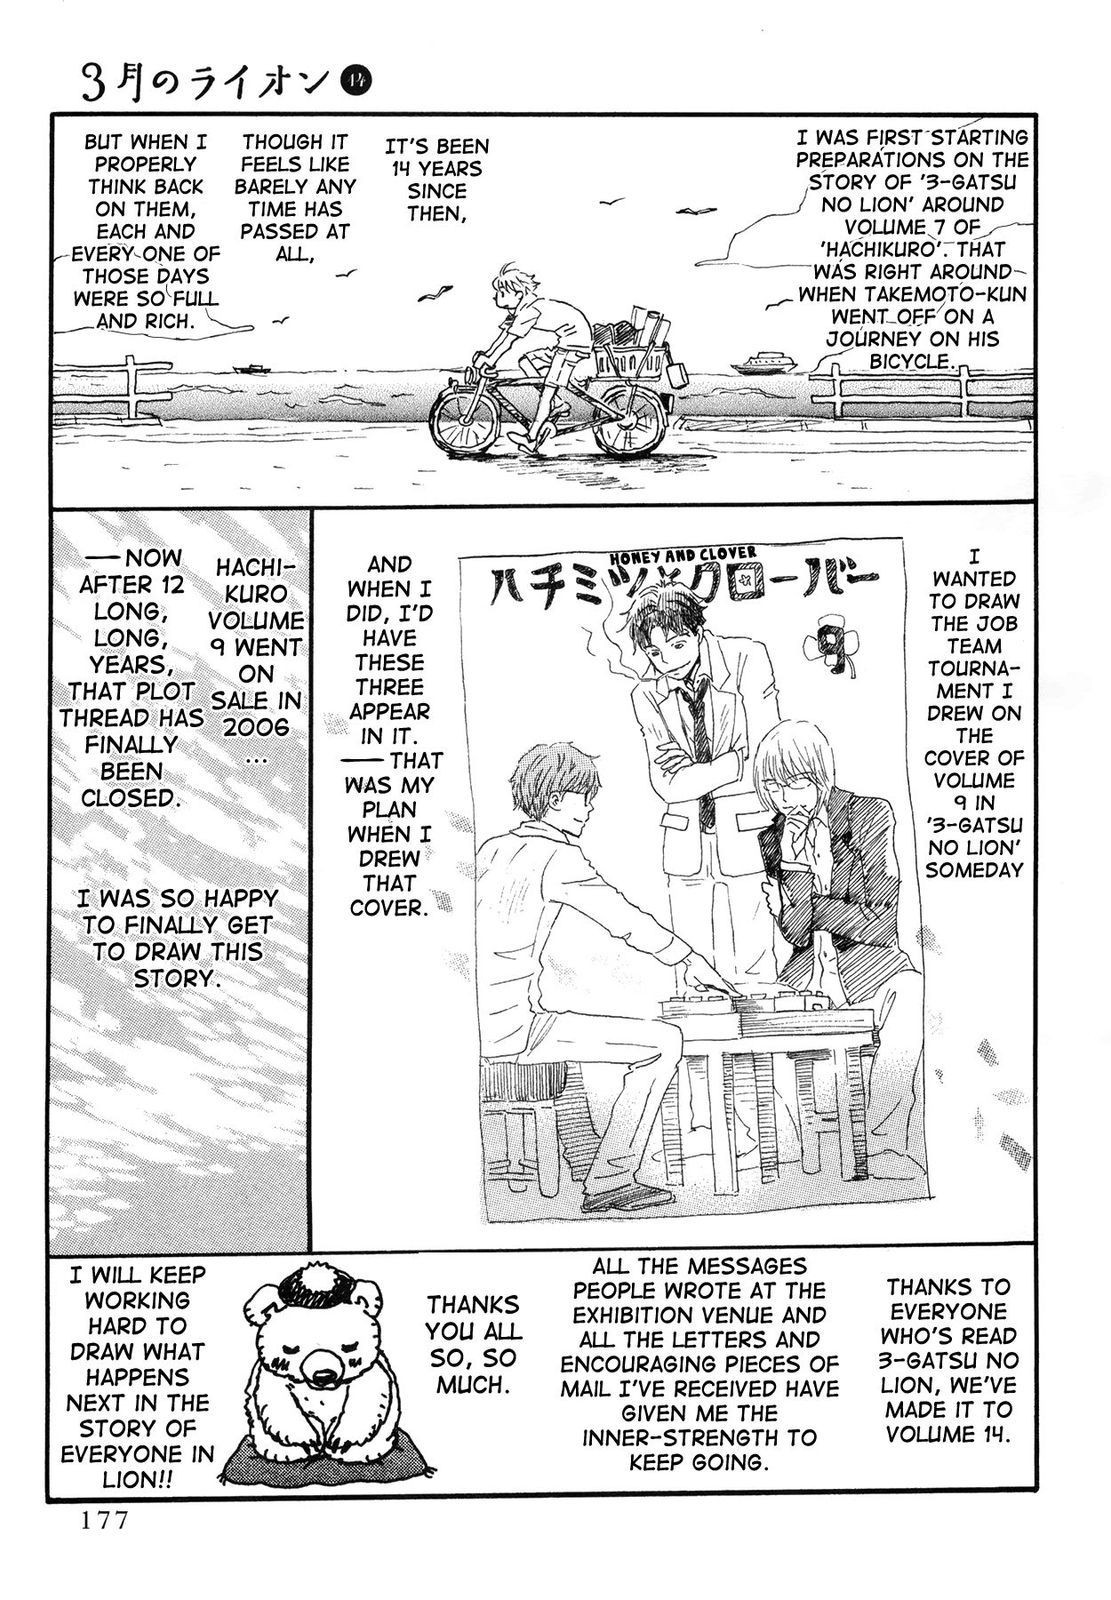 March Comes in Like a Lion, Chapter 153 Autumn Scenery (Part 6) (EN) image 15